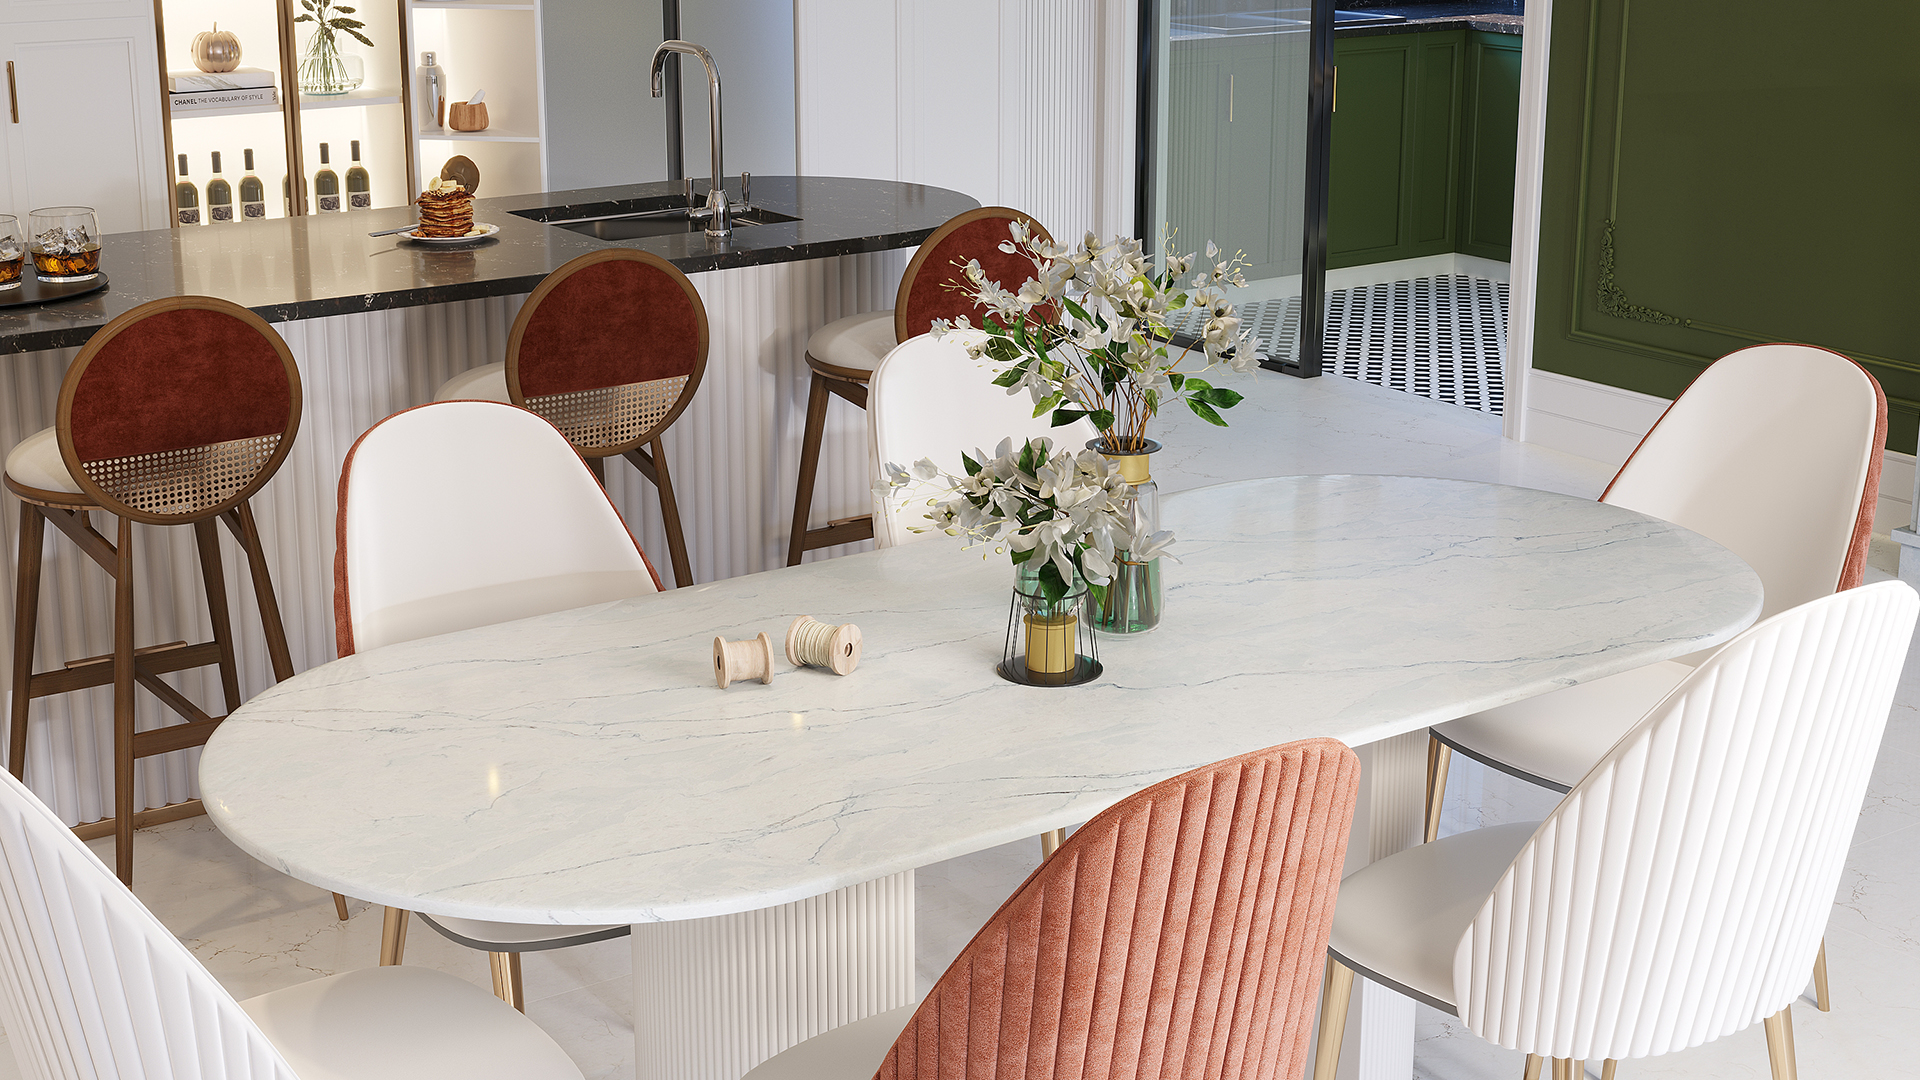 Dining room table featuring a Marino quartz top